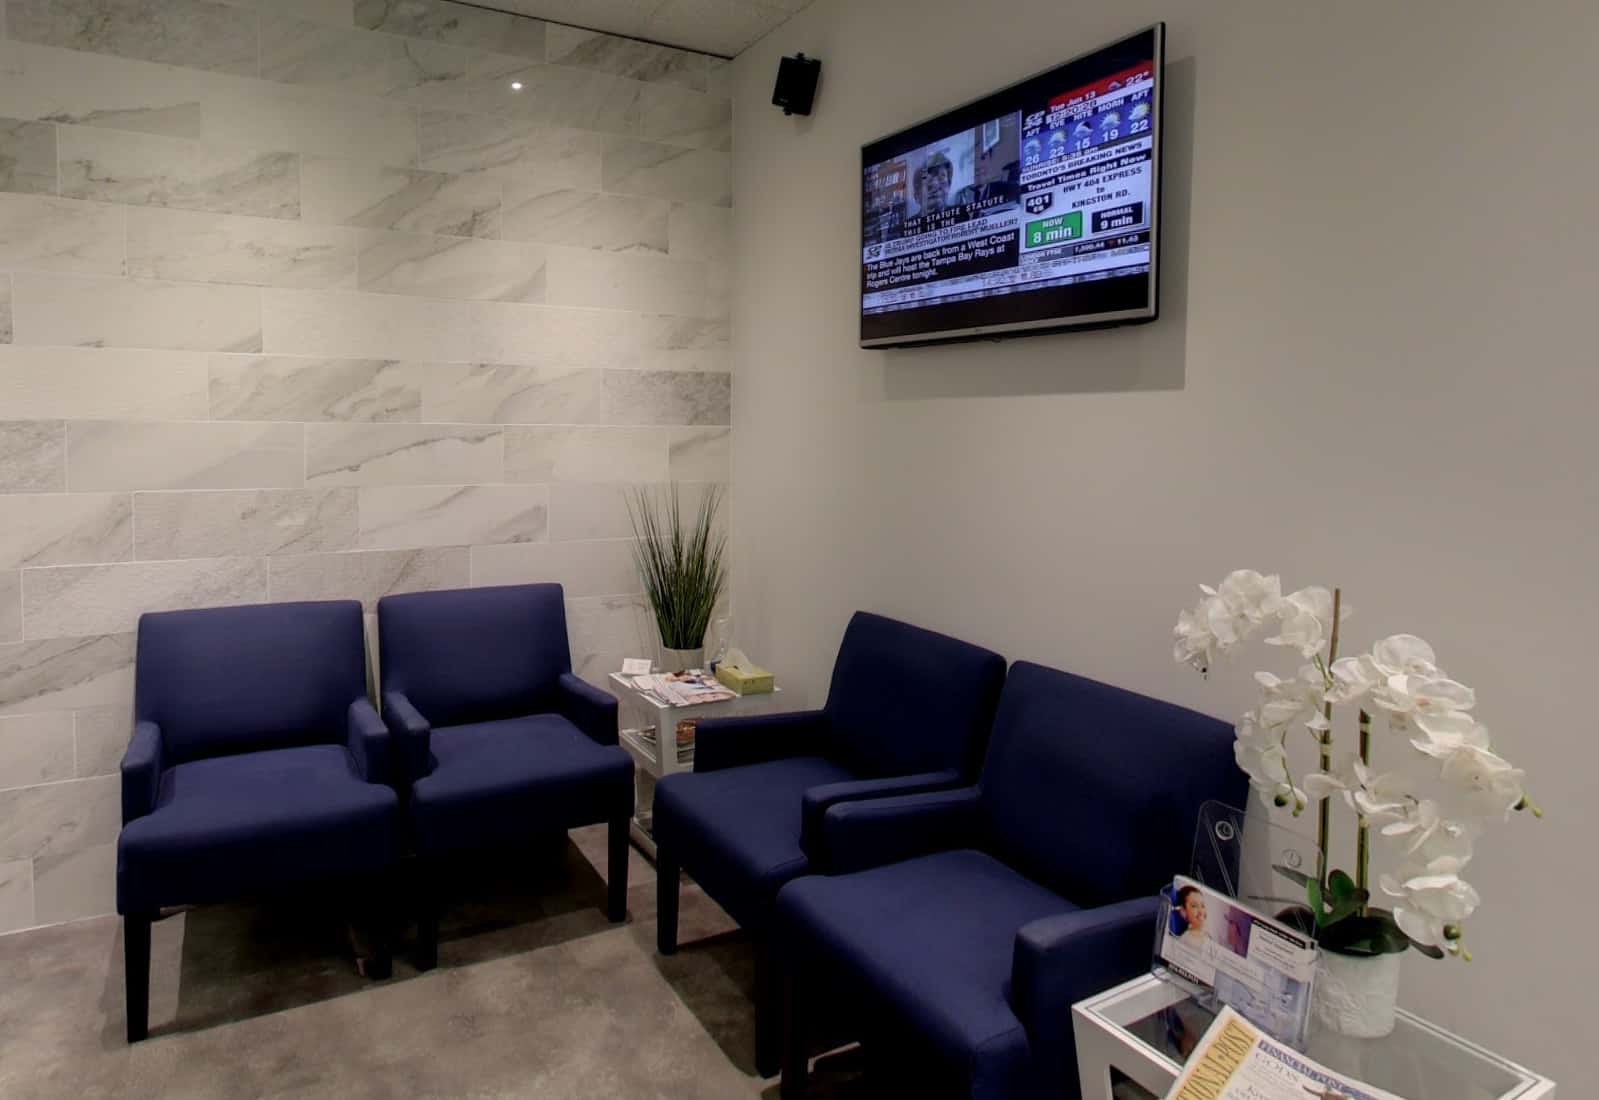 Dental office waiting area with flat screen television.